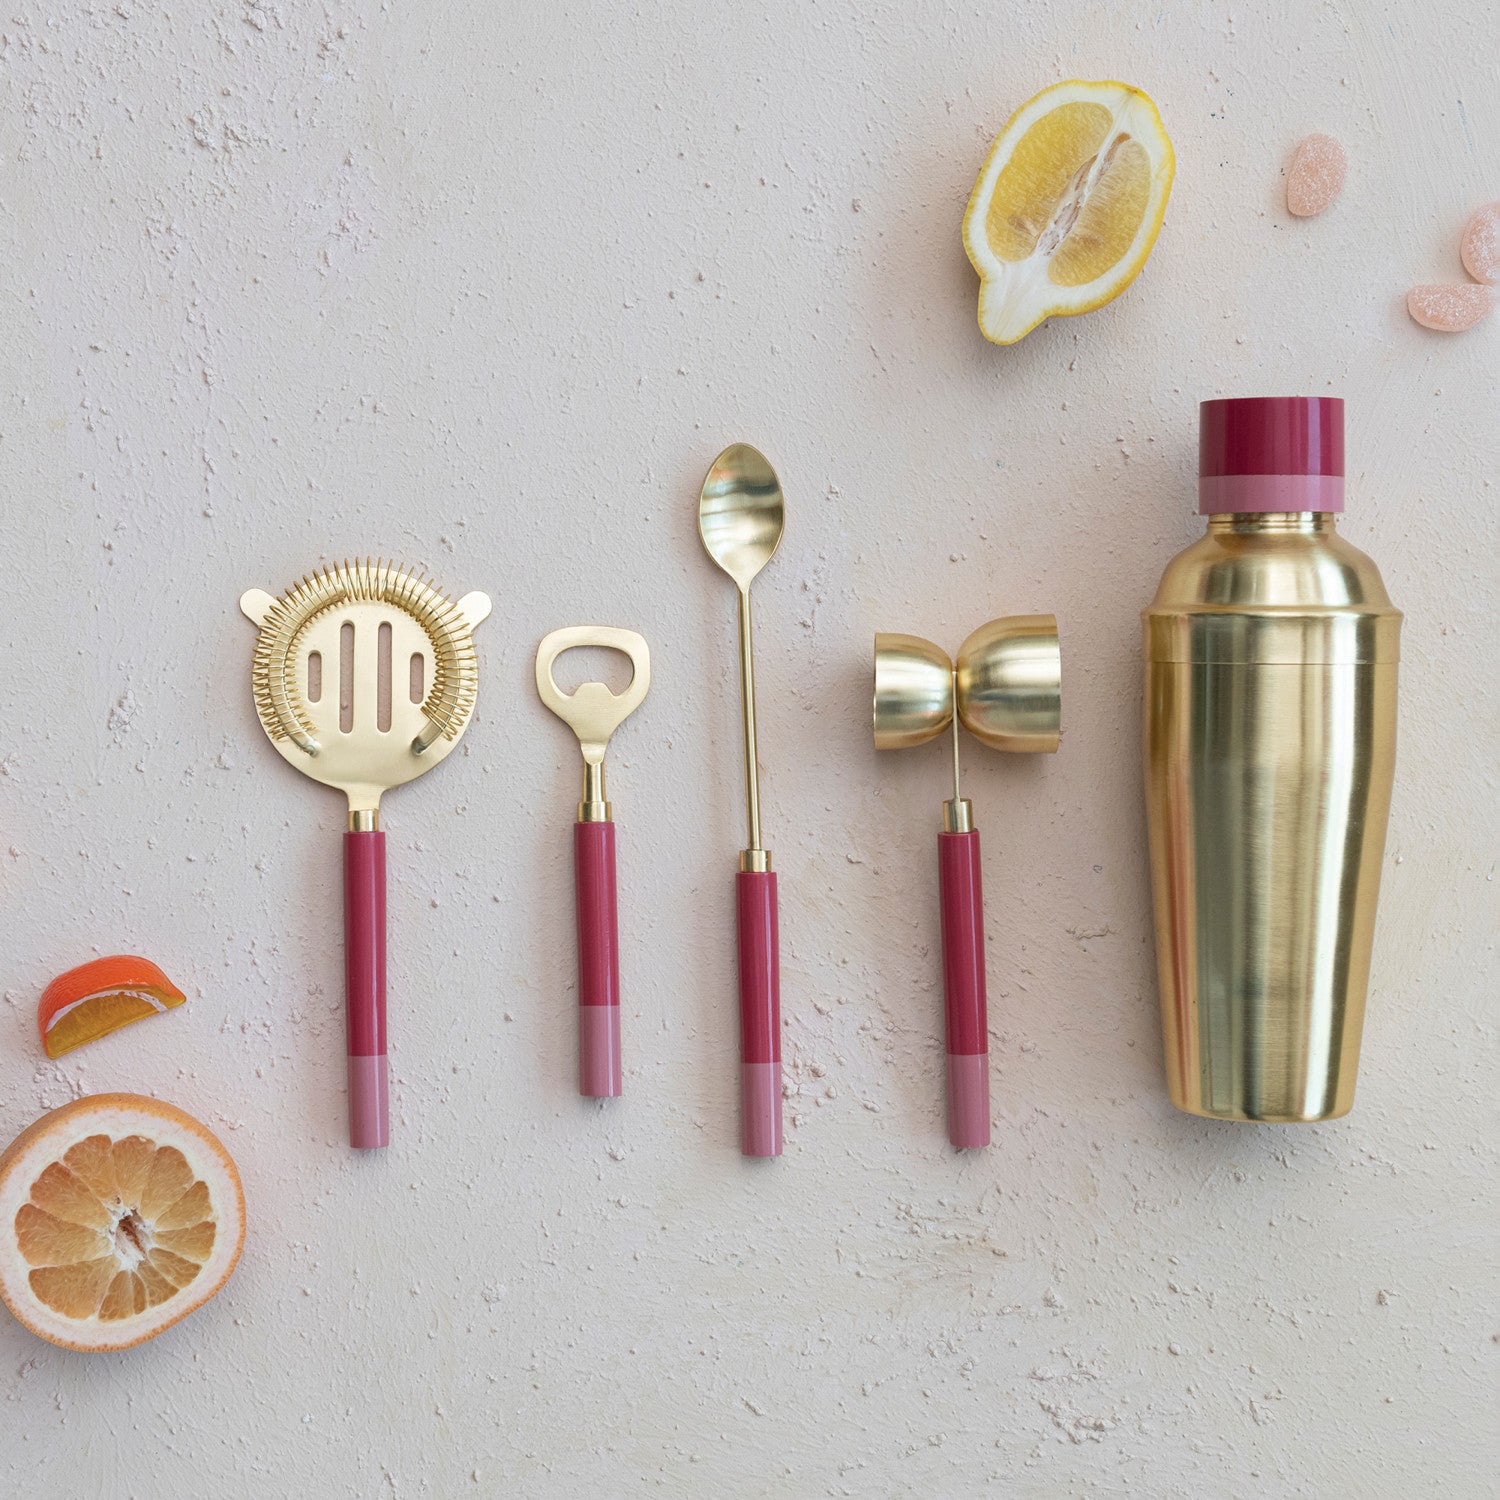 Fun, Moderate Stainless Steel Cocktail Shaker w/ Resin Top, Brass Finish and Pink